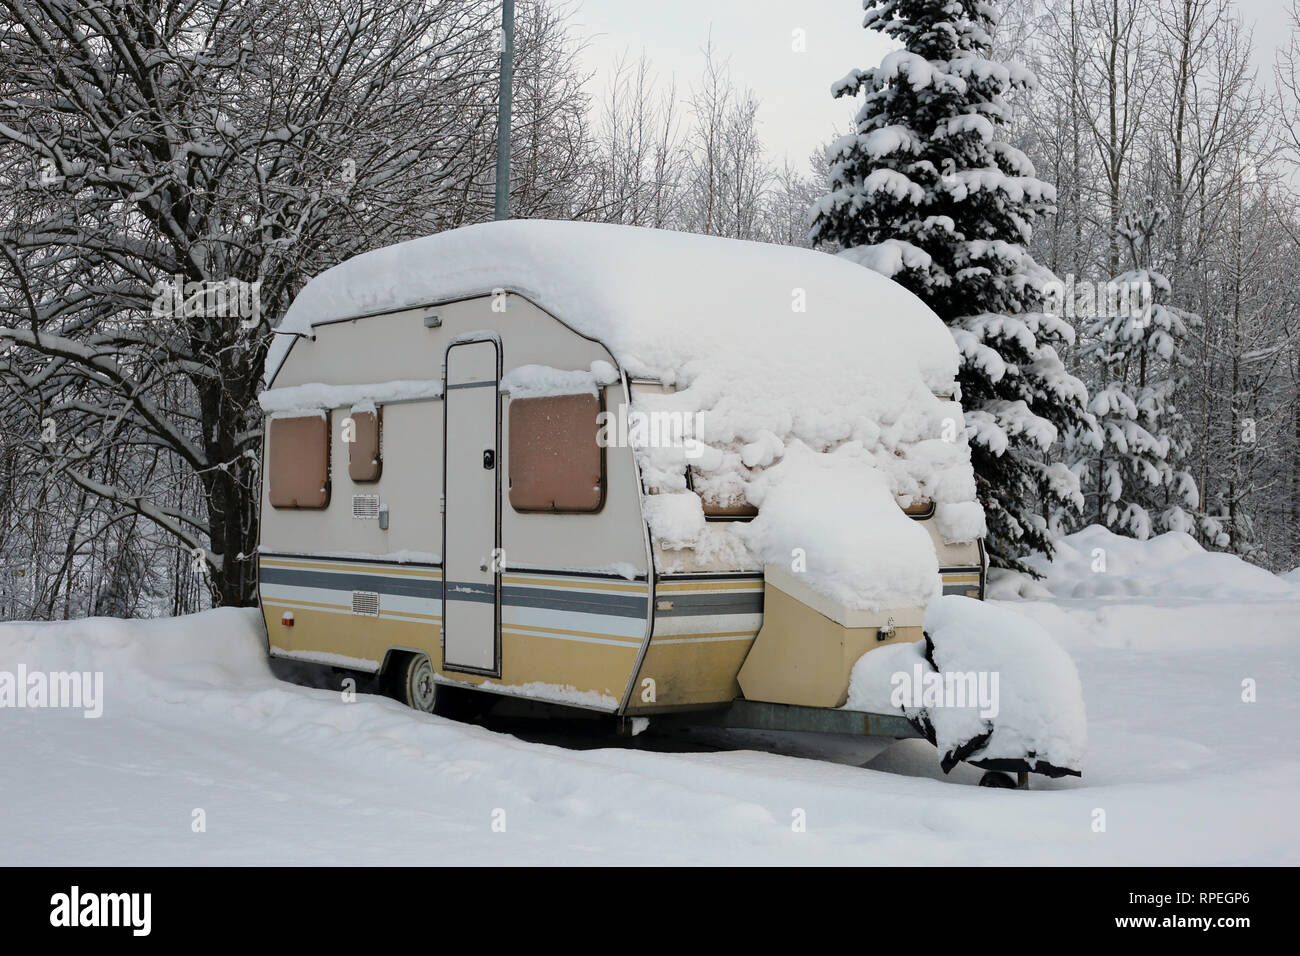 Caravan trailer in a parking lot next to a forest covered with snow during winter in Europe. The trailer is yellow and grey colored. Stock Photo